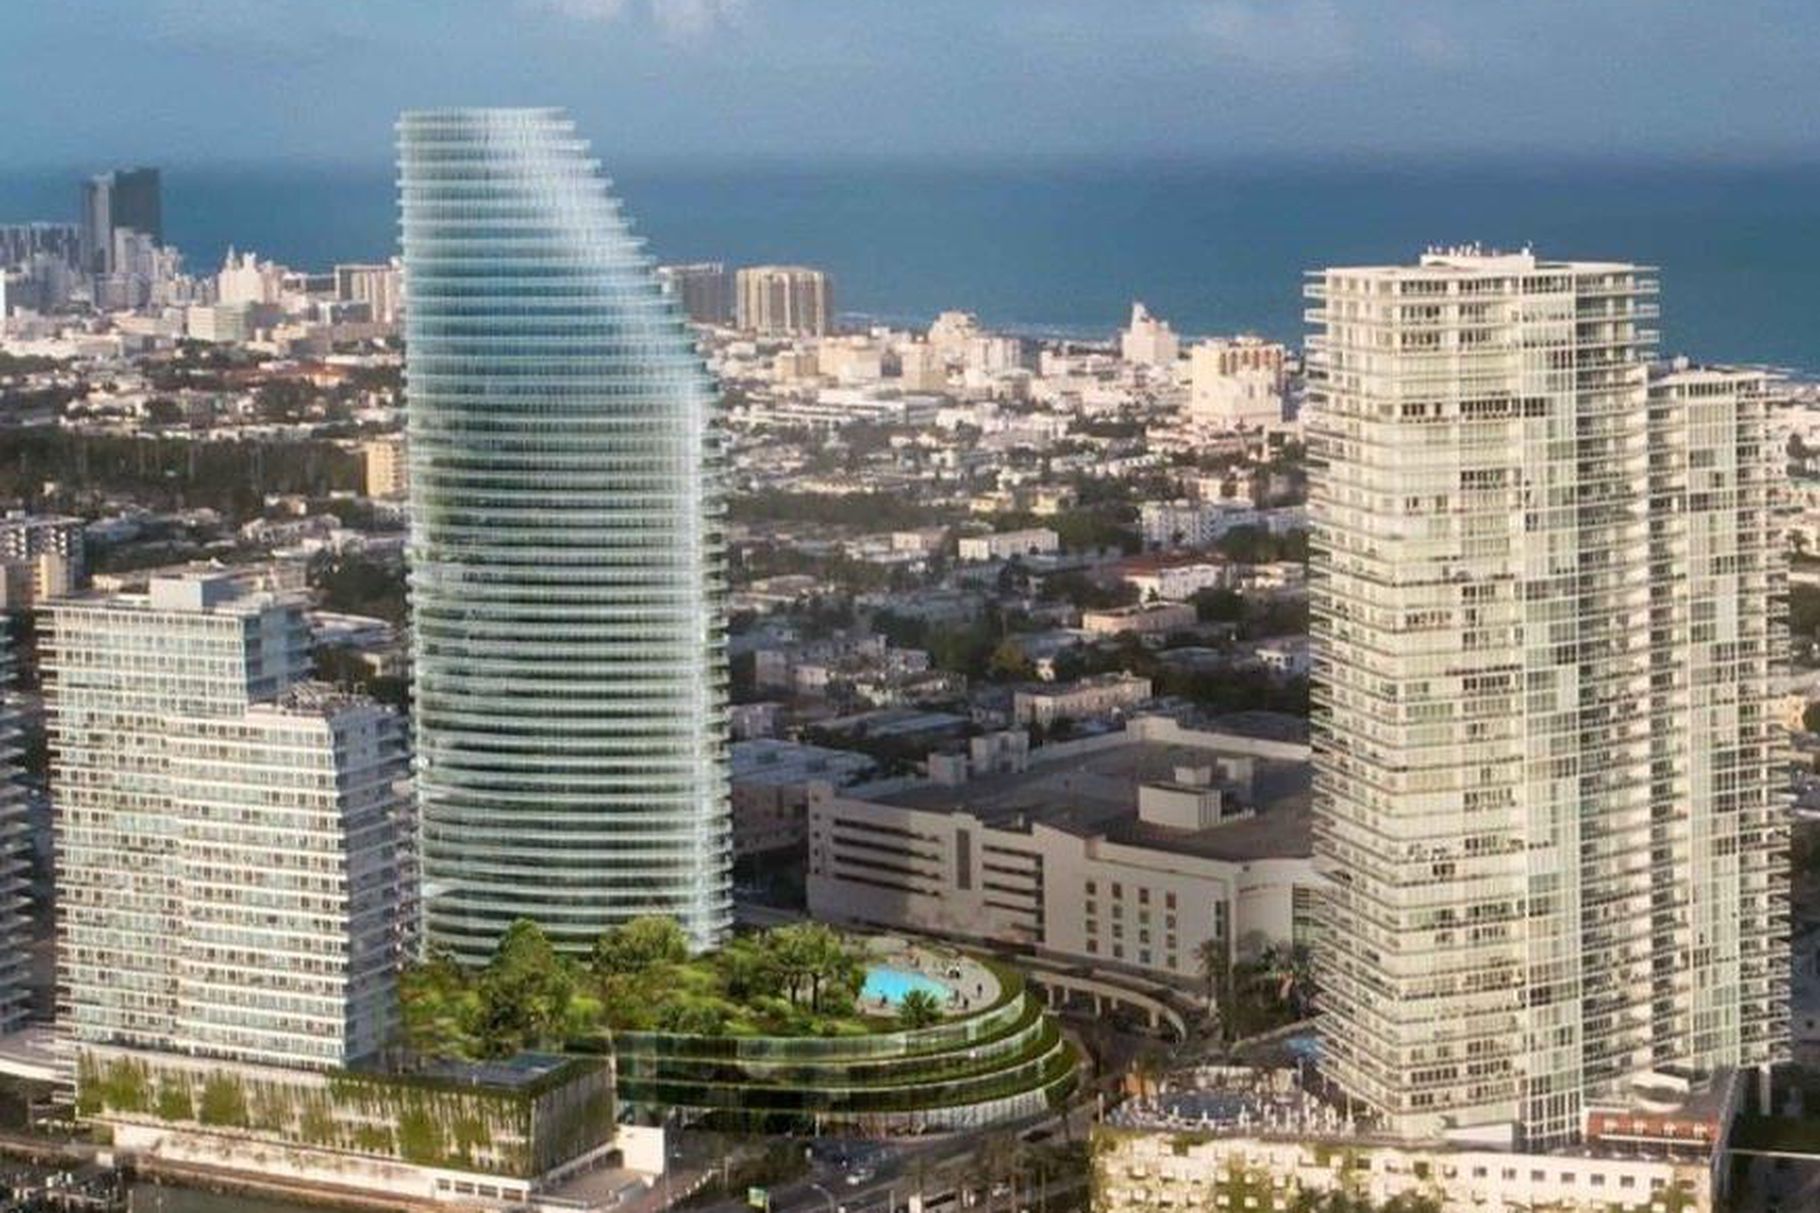 New renderings of the 44-story condominium to be built on Alton Road